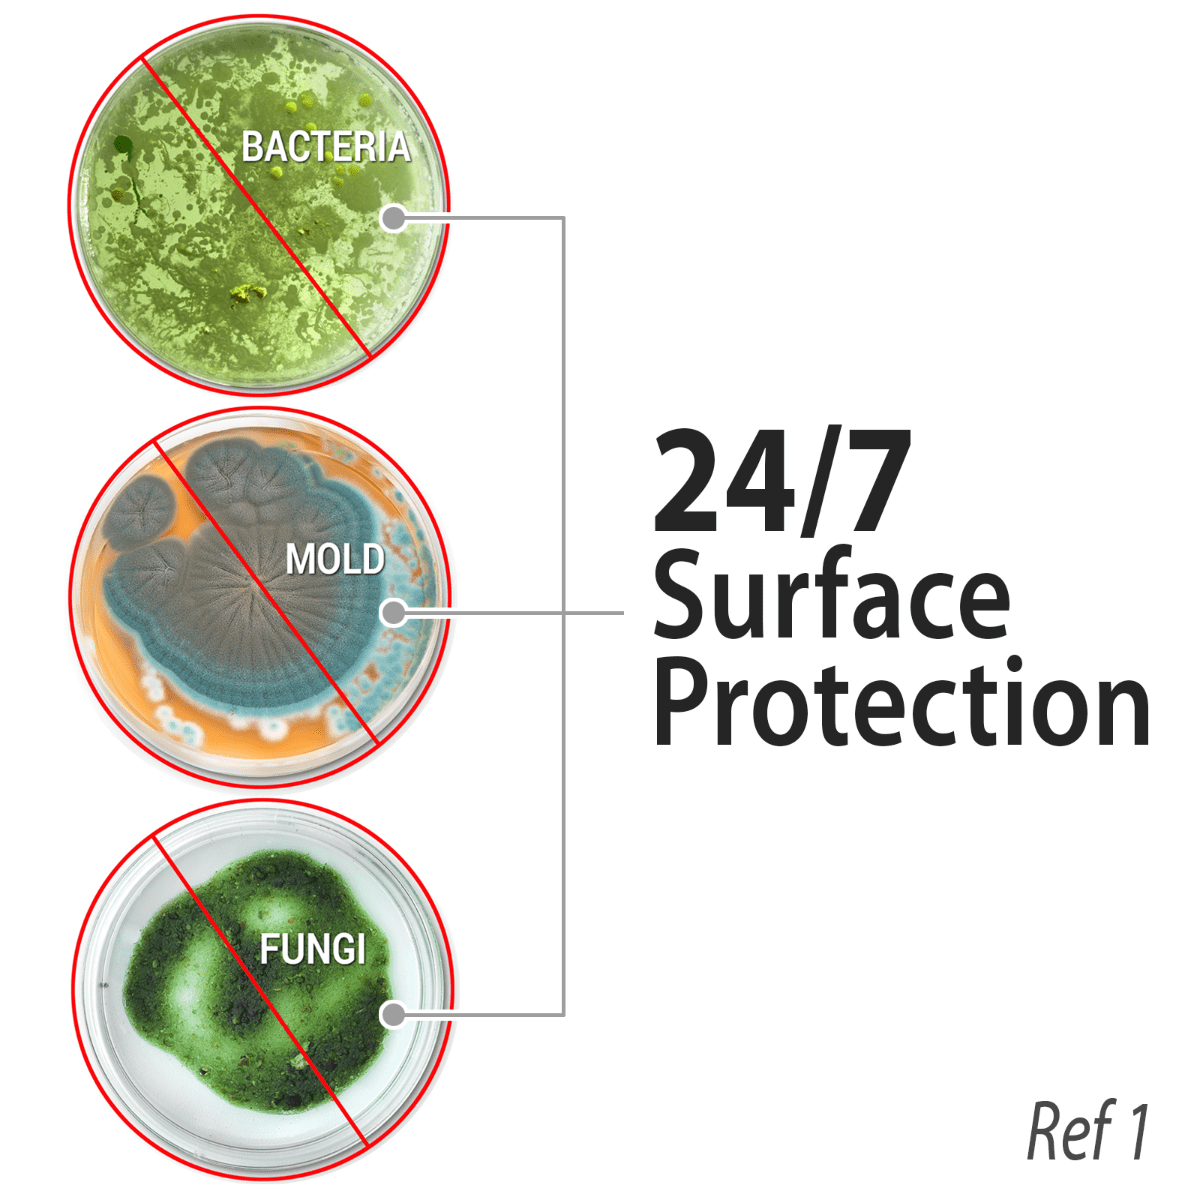 ASP antimicrobial surface protection